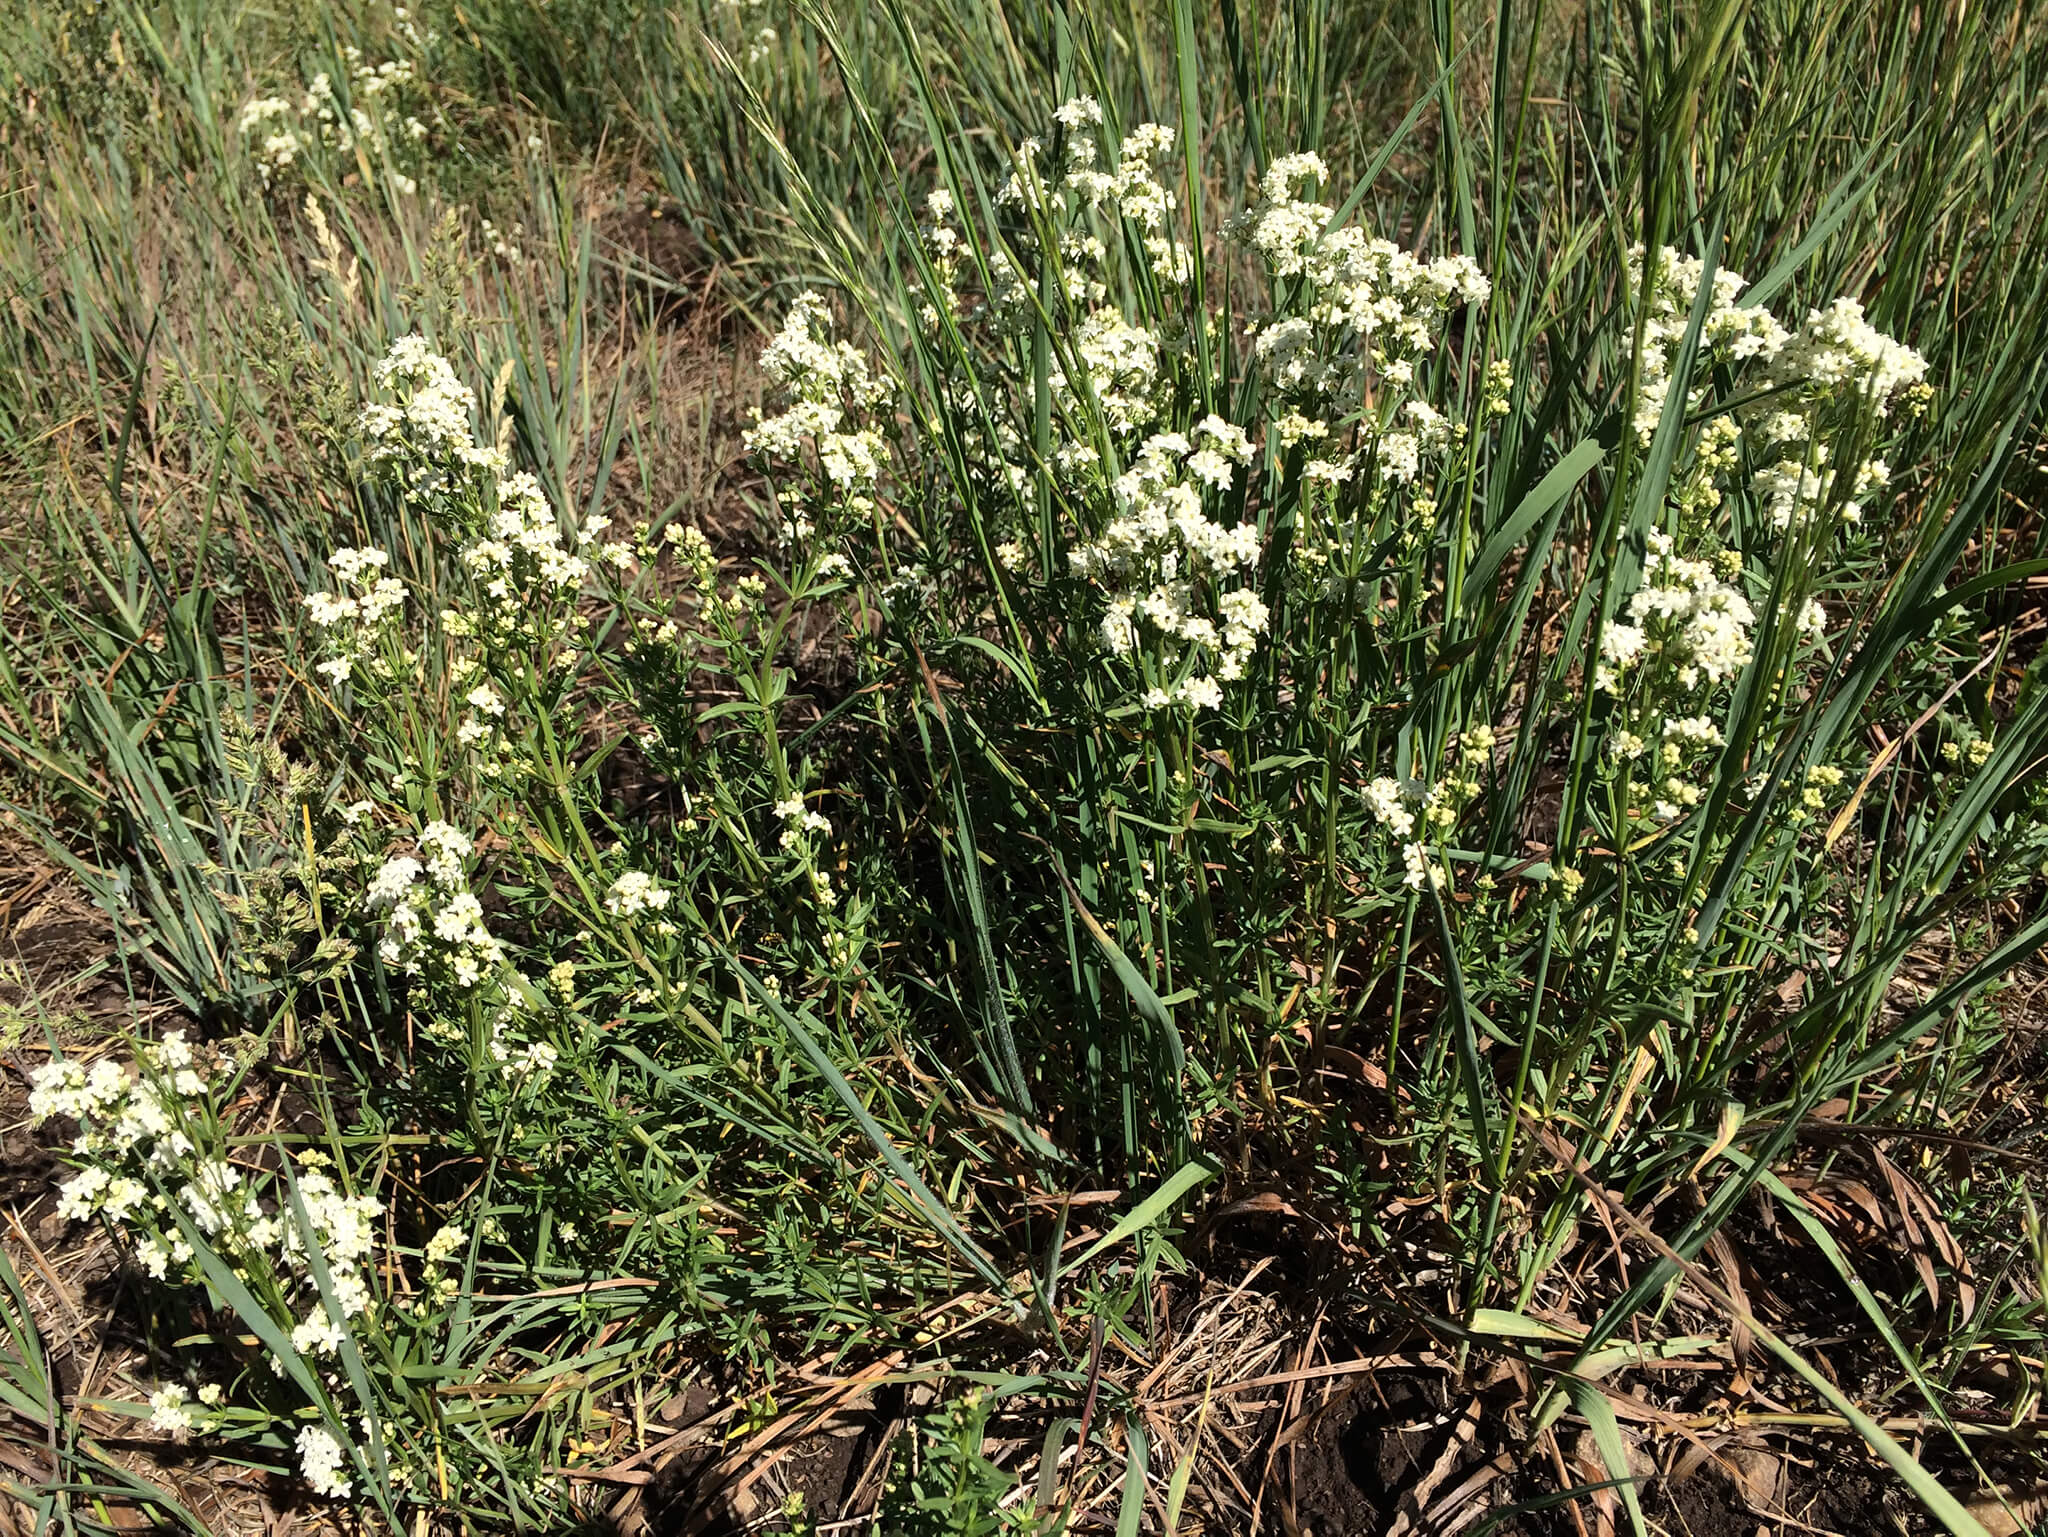 Bedstraw:  Tiny white flowers give the plant a fluffy look, like a down comforter.